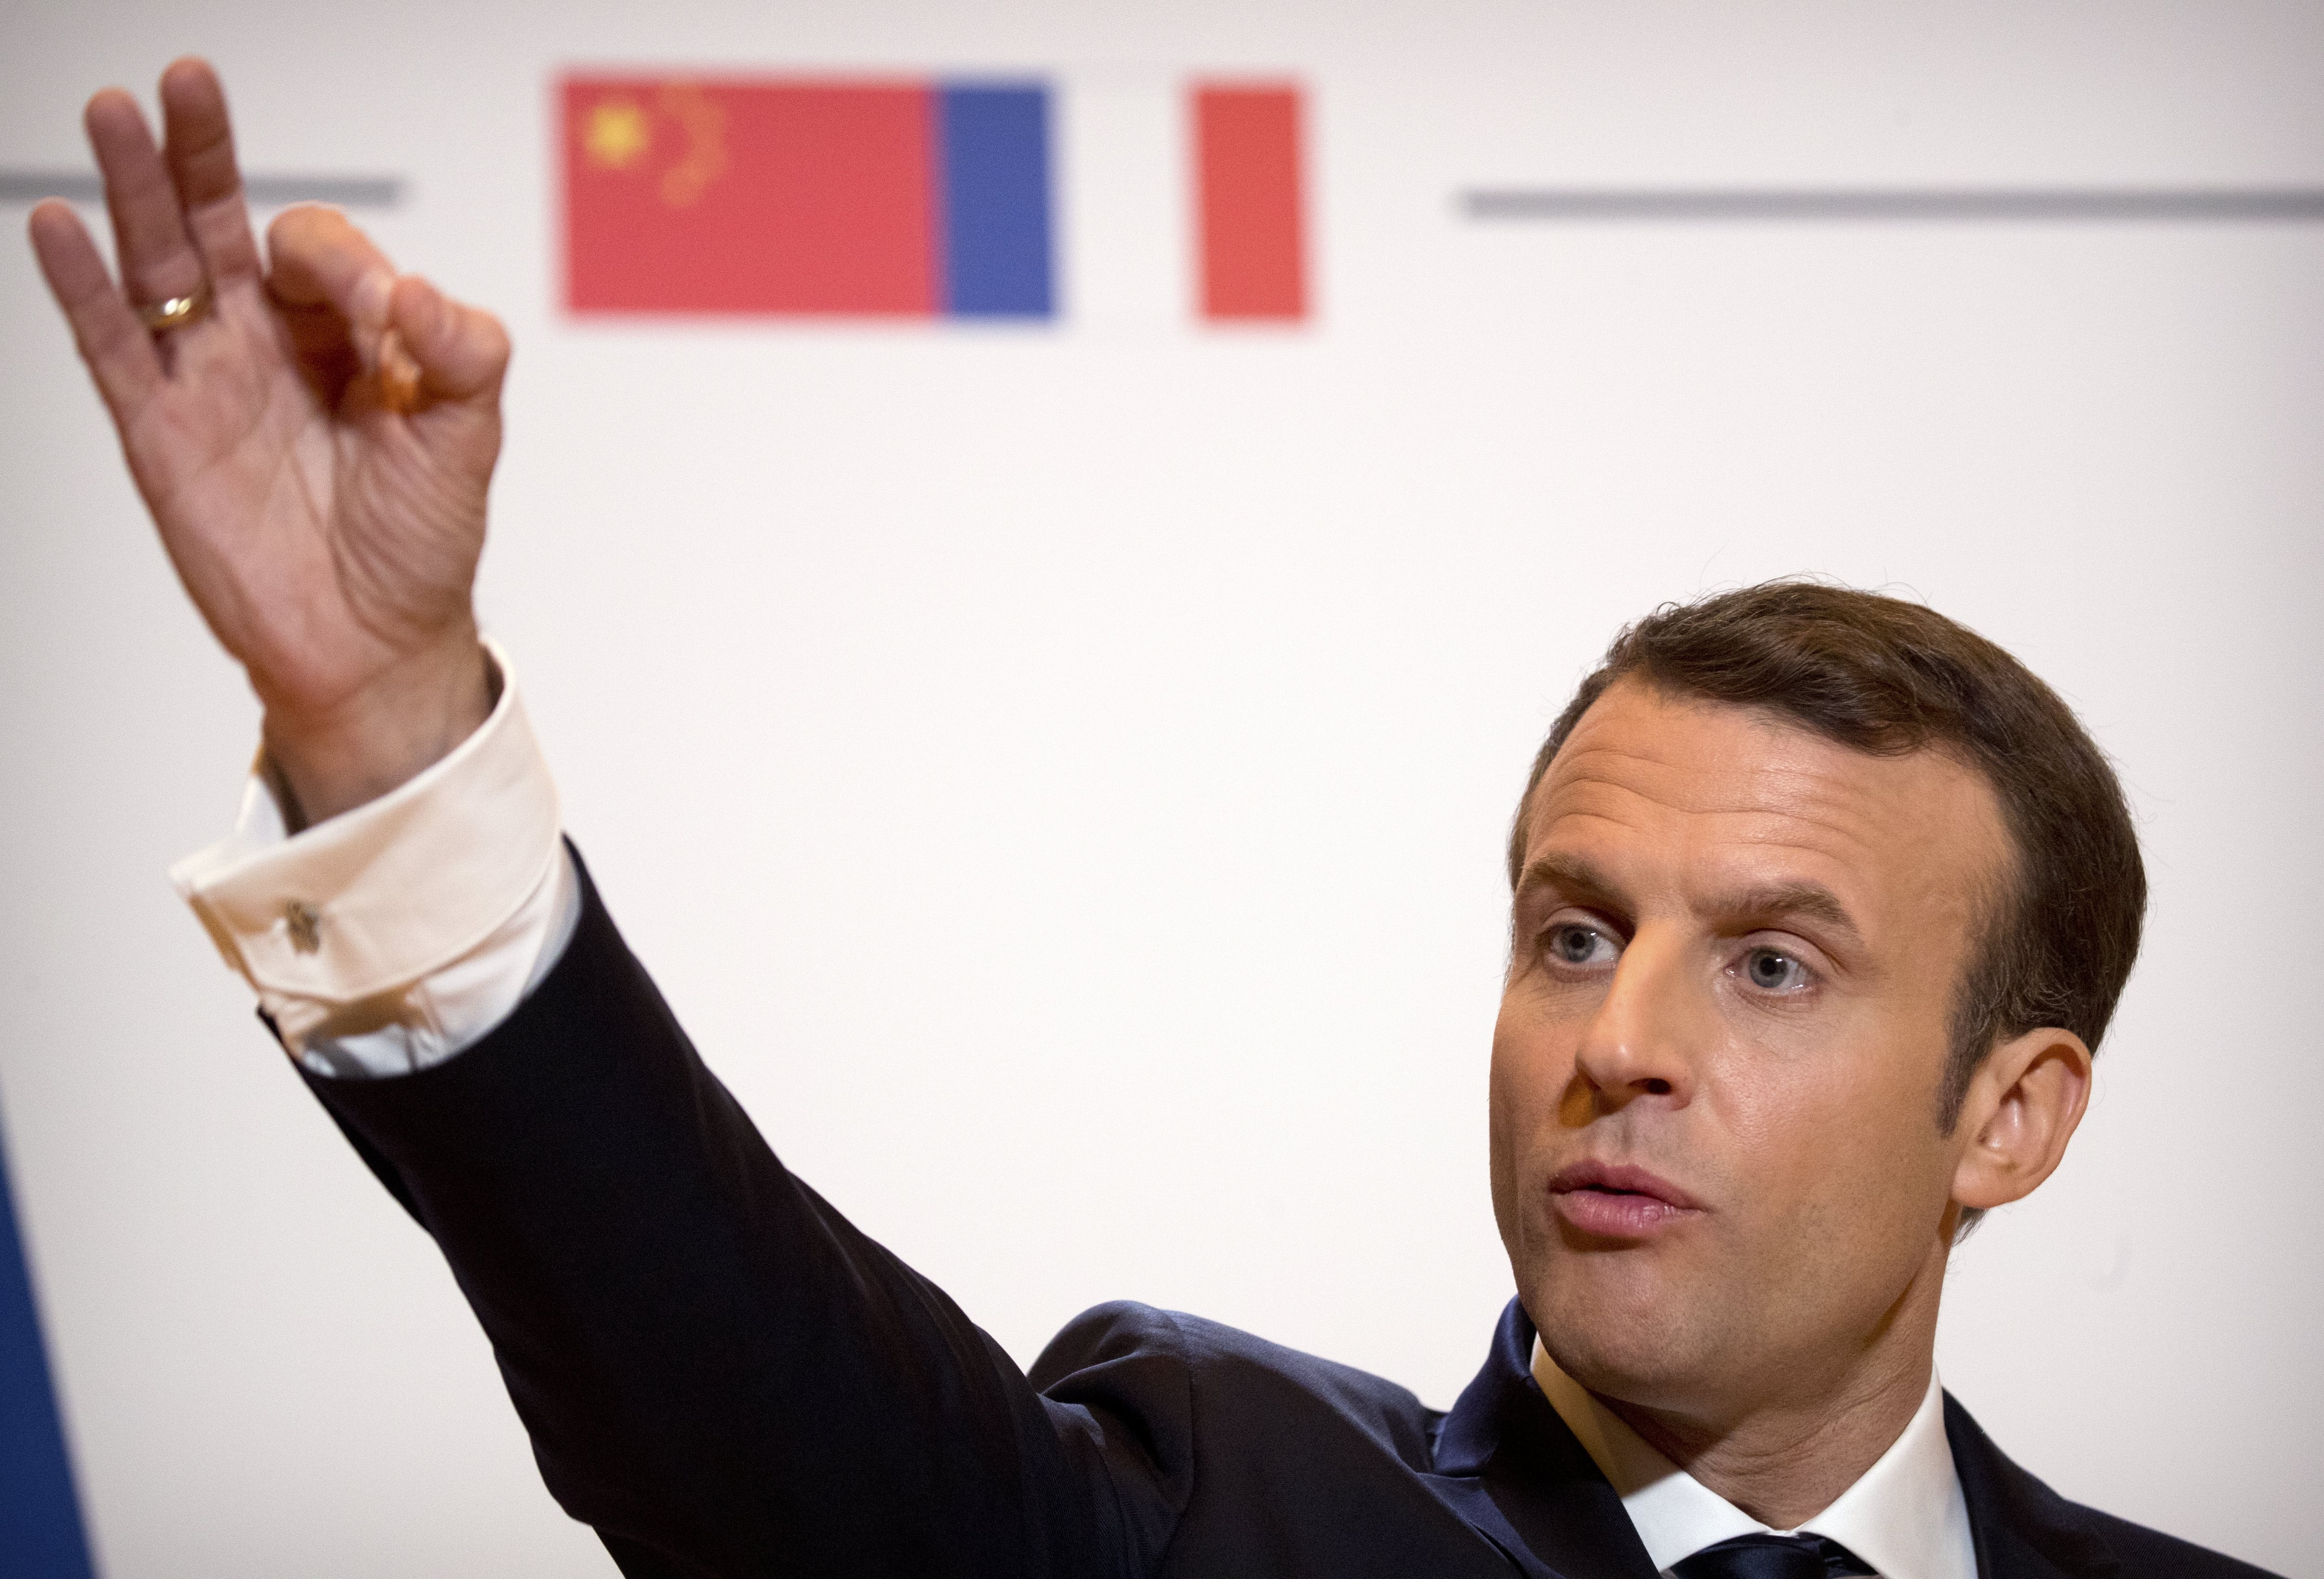 French President Emmanuel Macron called for China and Europe to work together on climate change. Photo: EPA-EFE